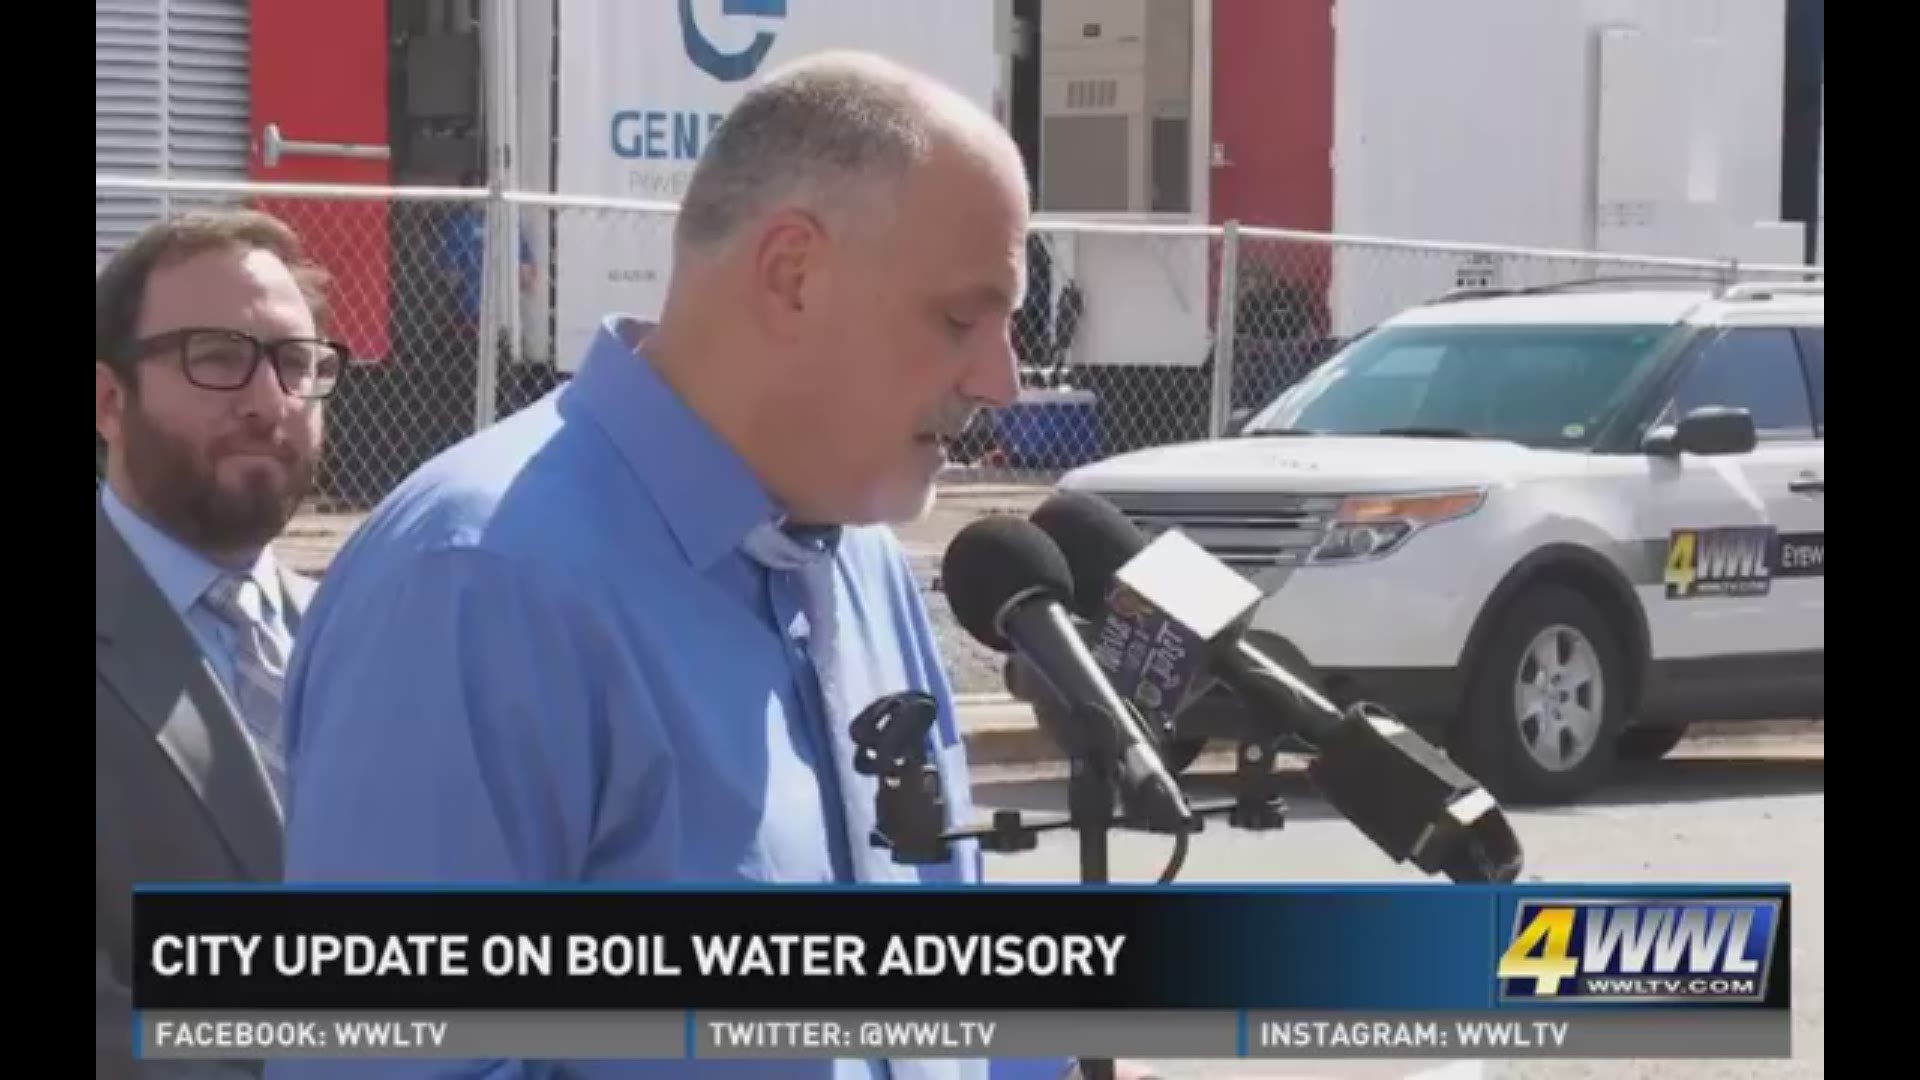 Mayor Mitch Landrieu's Office says a "power fluctuation" caused a widespread drop in water pressure in New Orleans Wednesday morning.The fluctuation caused the city to issue a precautionary boil water advisory for the East Bank until further notice.